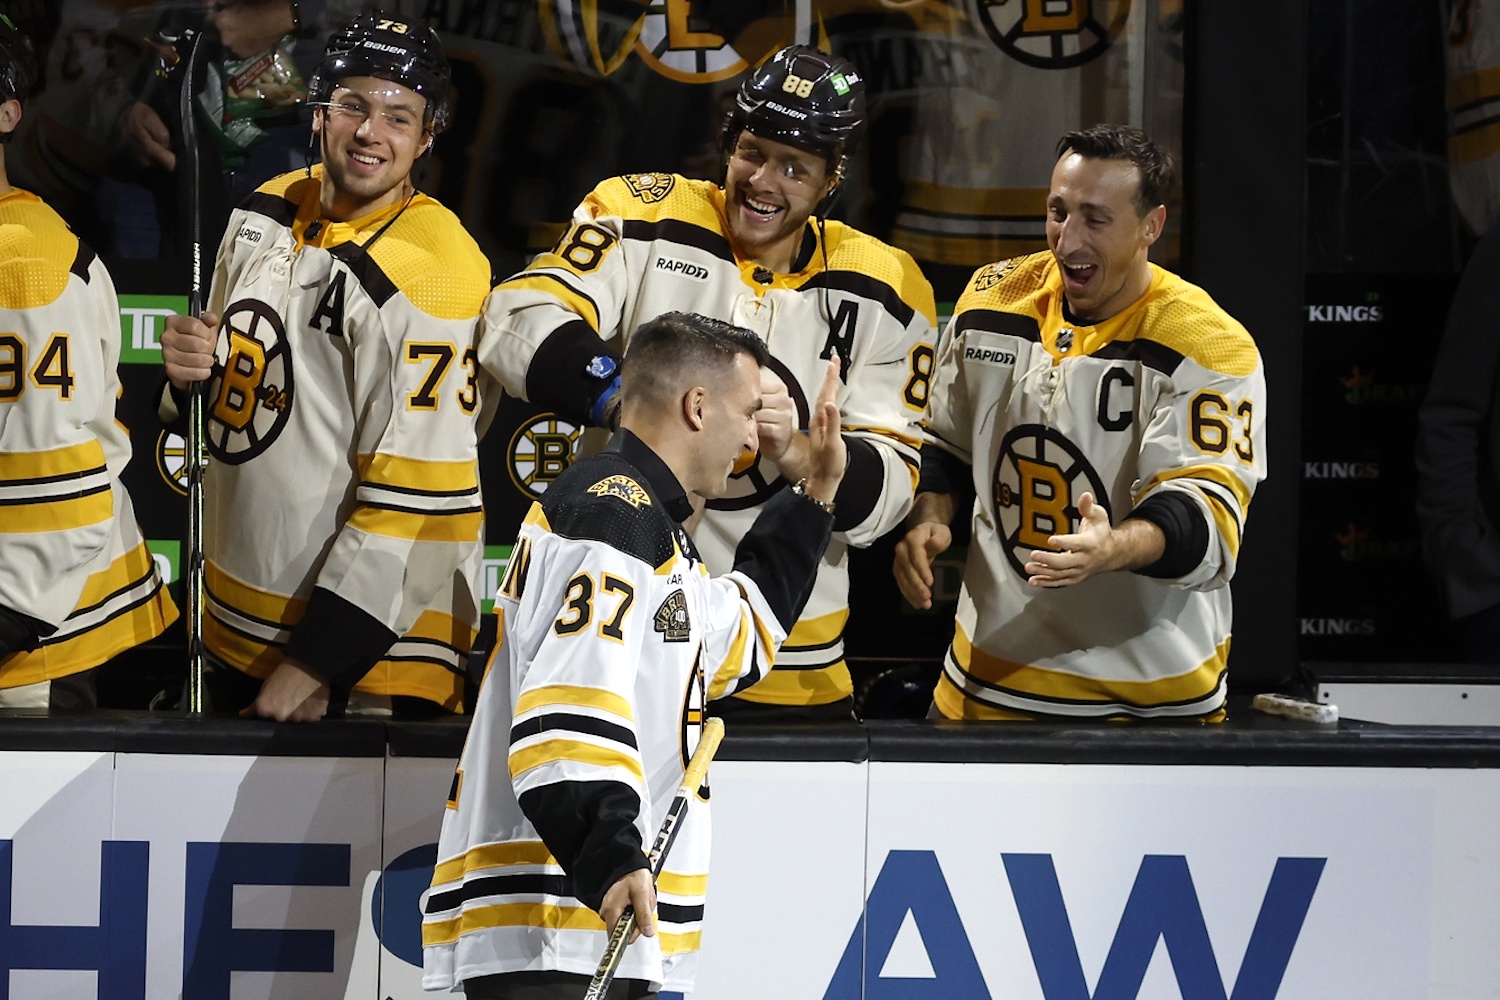 Oct 11, 2023; Boston, Massachusetts, USA; Former Boston Bruins captain Patrice Bergeron greets former teammates Boston Bruins right wing David Pastrnak (88) and left wing Brad Marchand (63) before the start of Boston’s 100th season in the NHL at TD Garden. Mandatory Credit: Winslow Townson-USA TODAY Sports